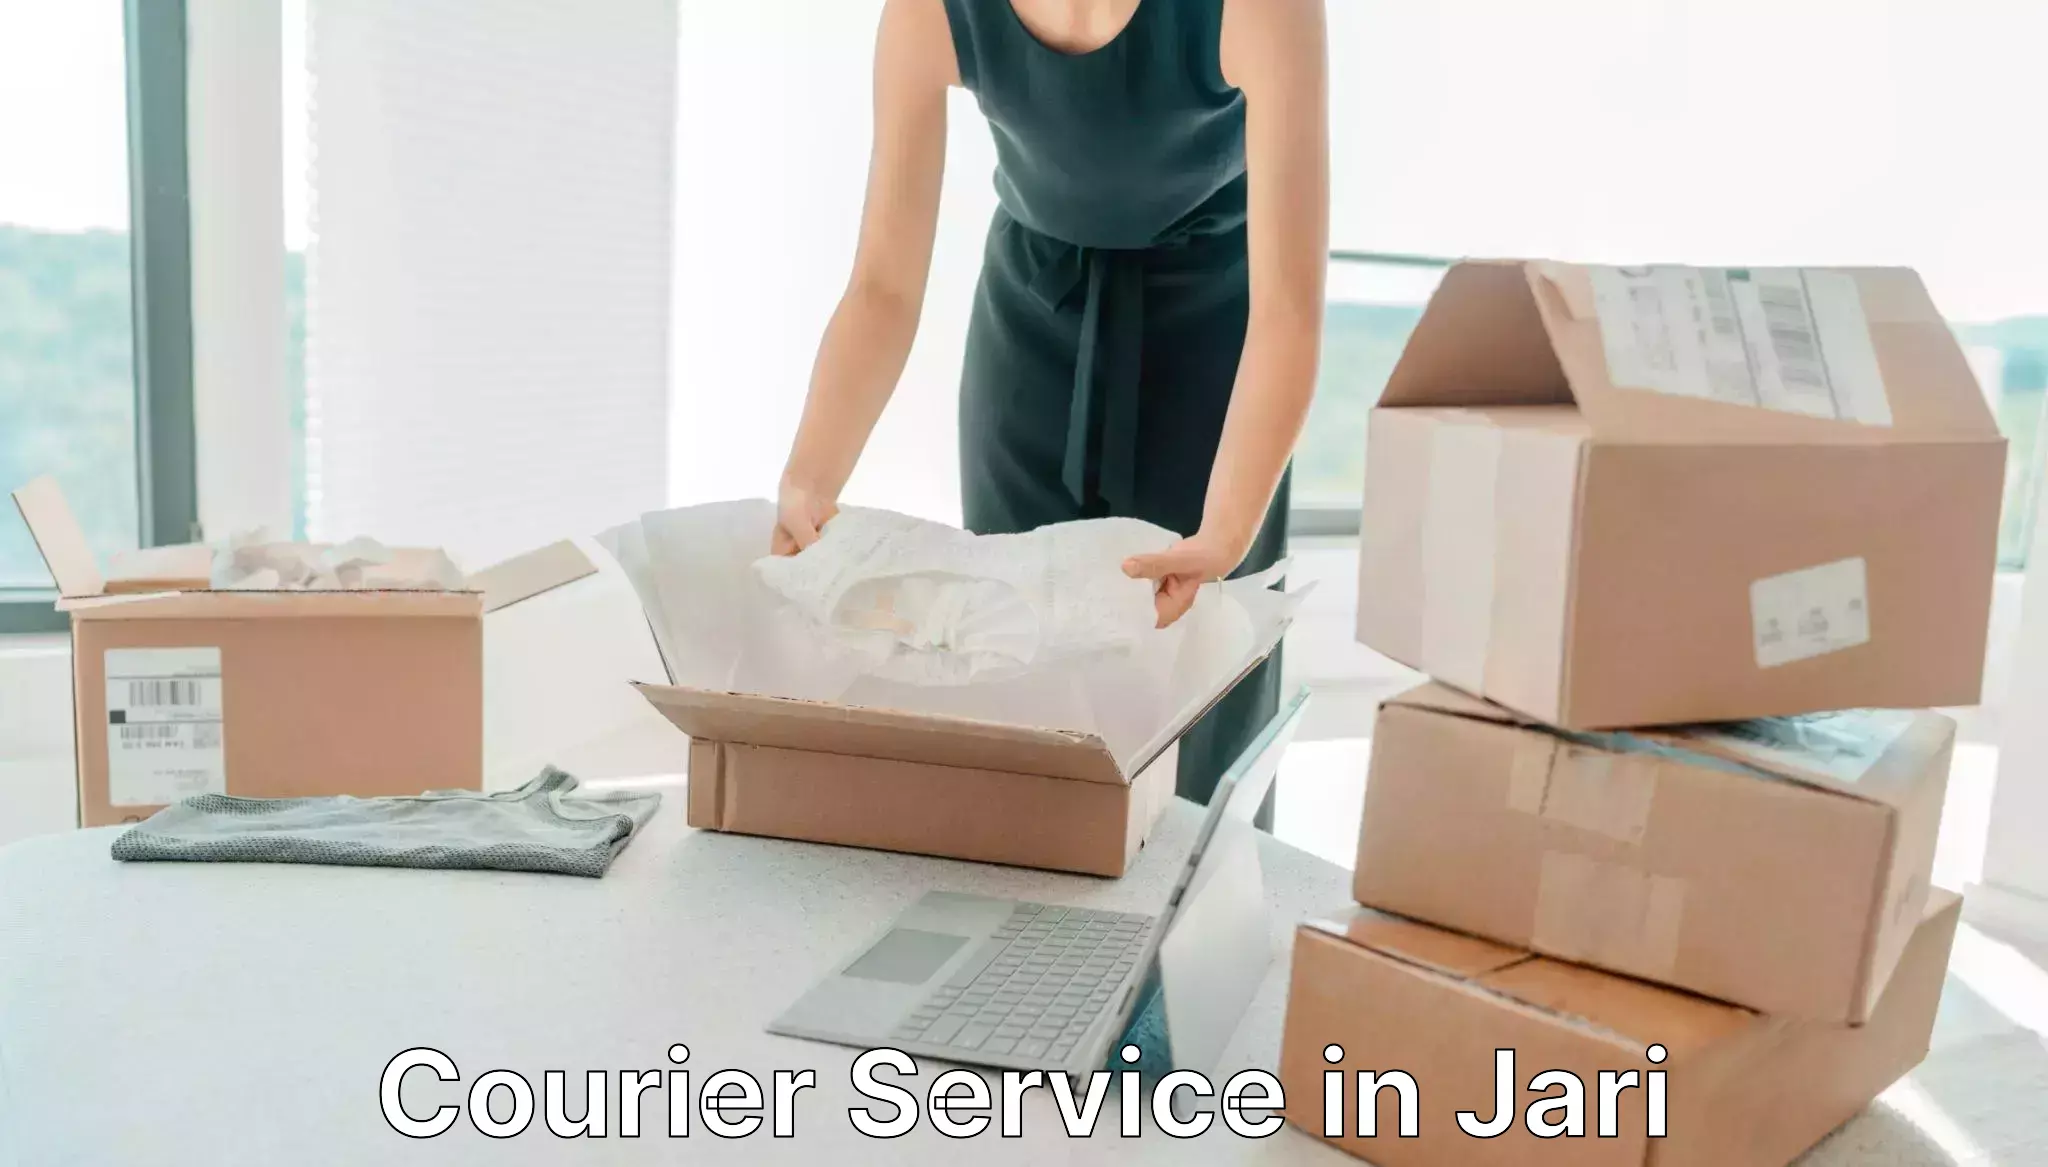 Customer-oriented courier services in Jari